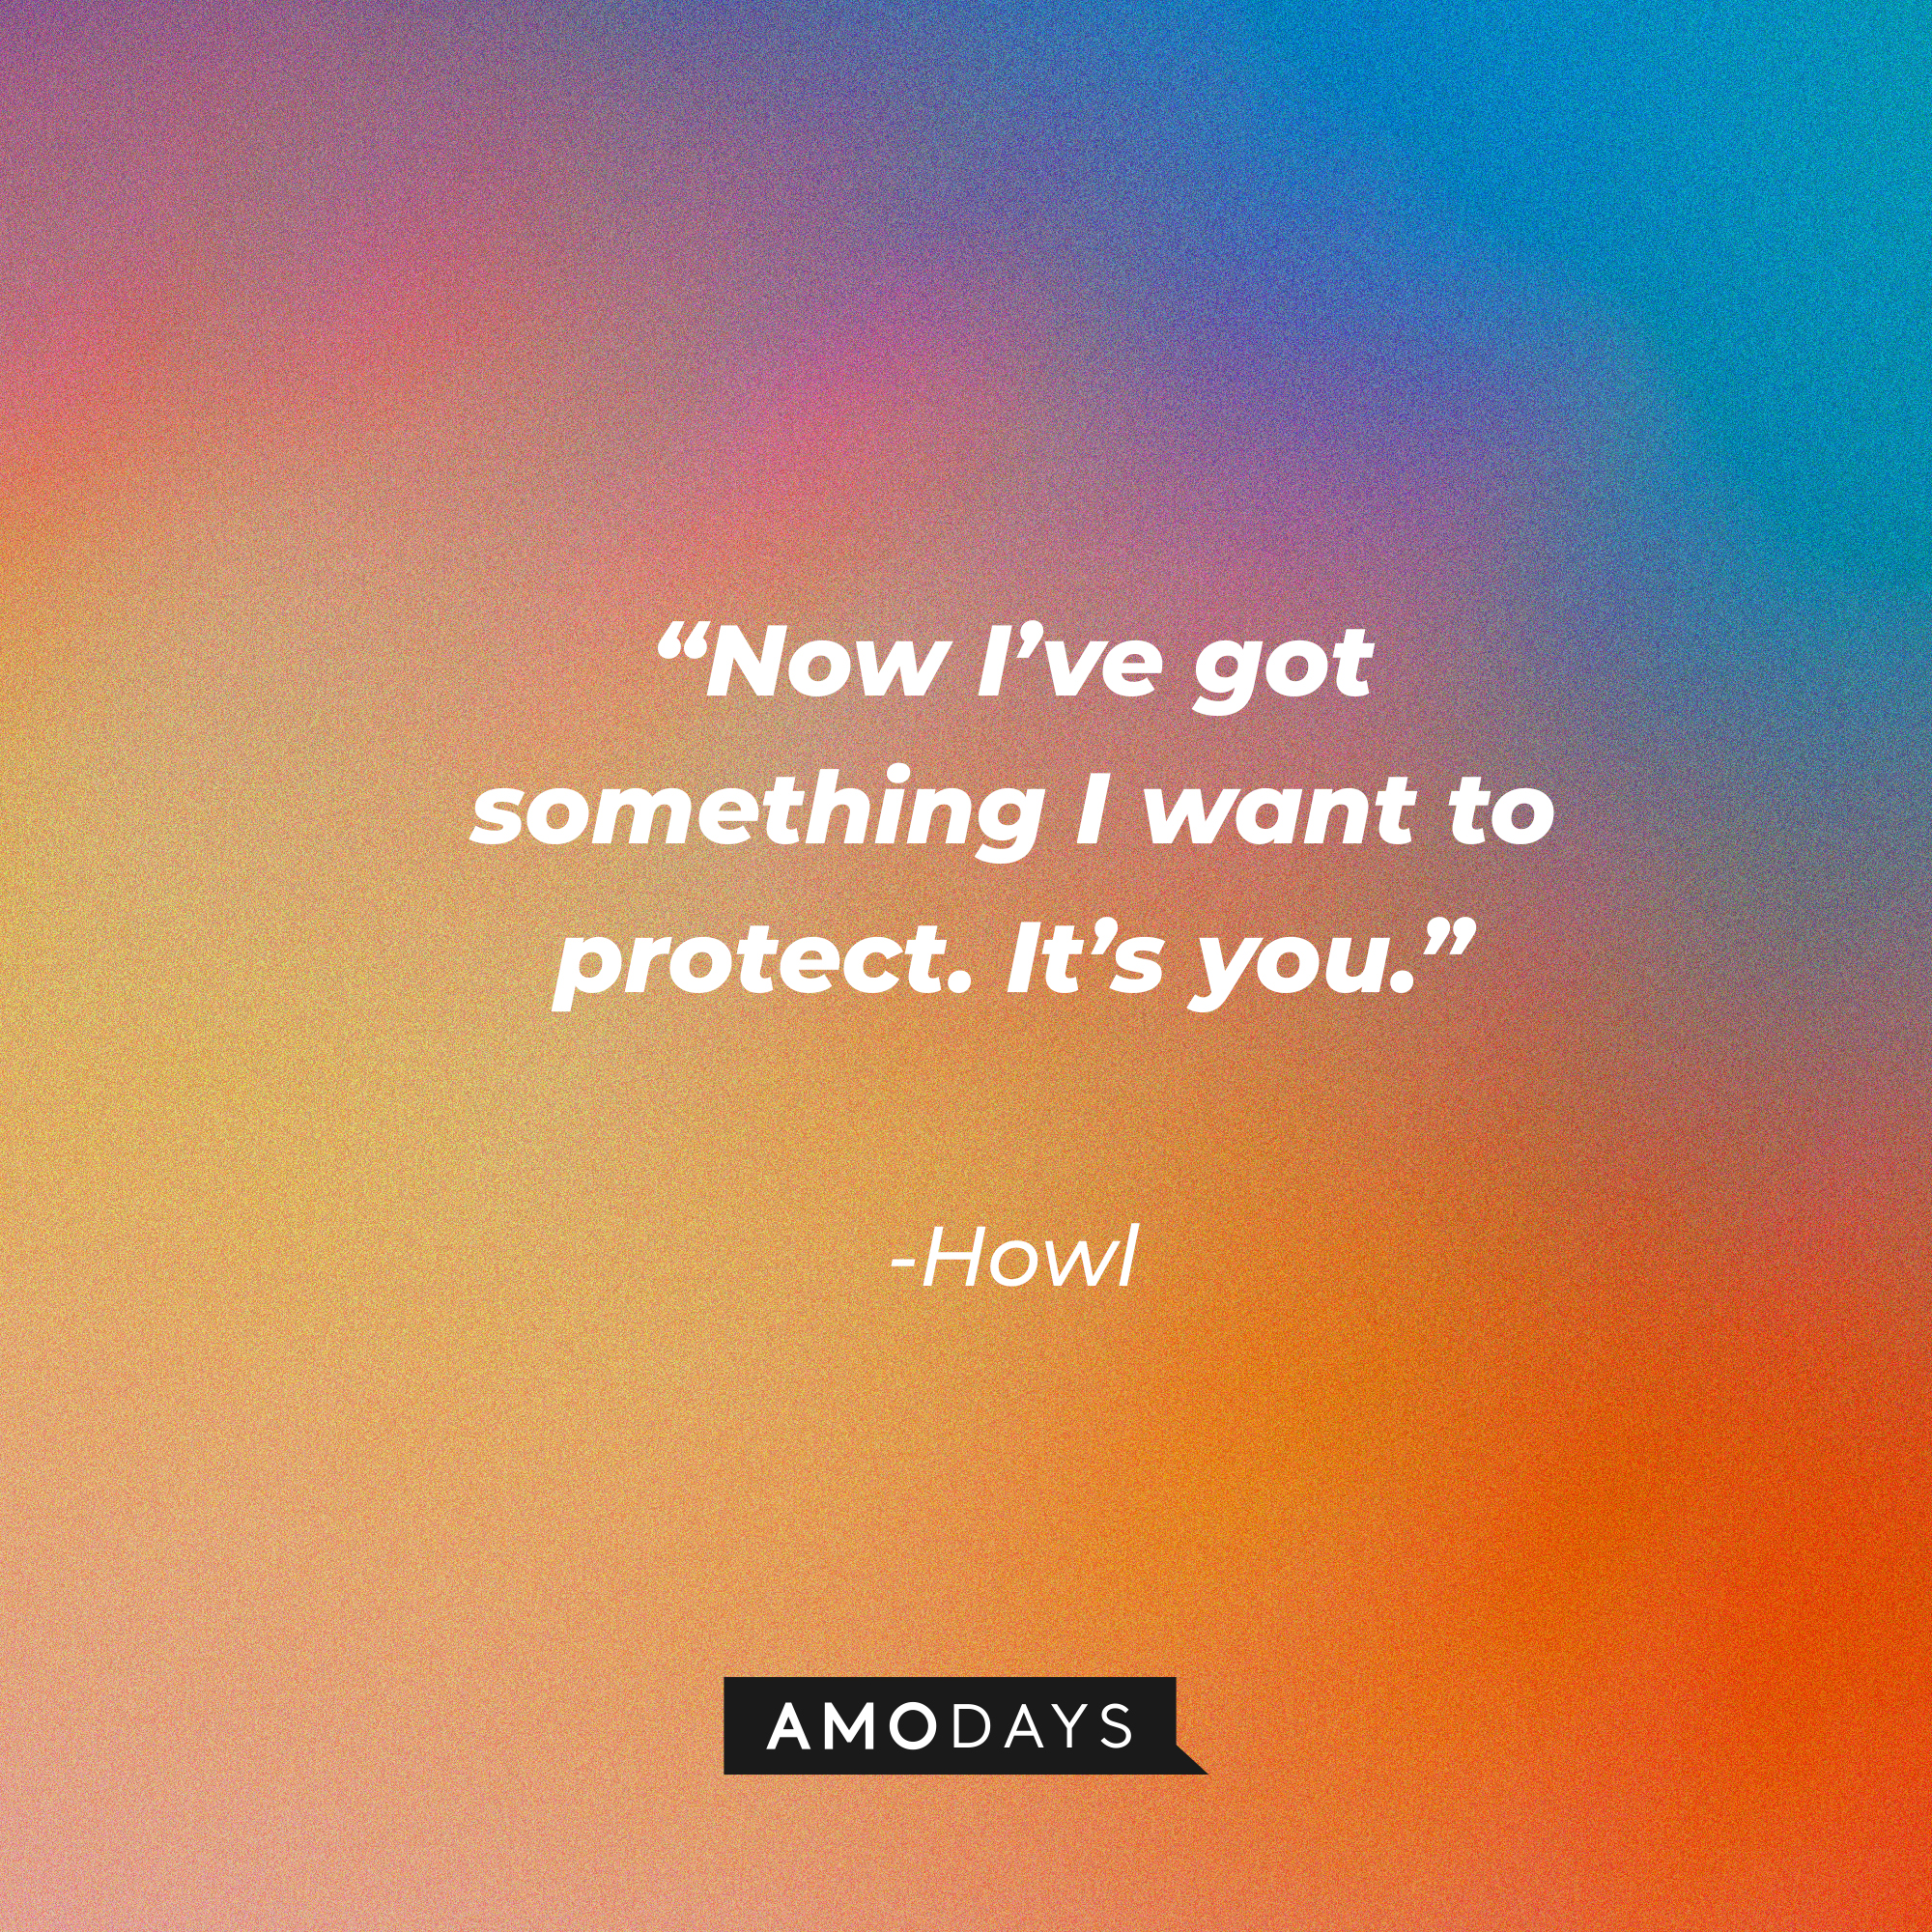 Howl’s quote: “Now I’ve got something I want to protect. It’s you.”  | Source: AmoDays